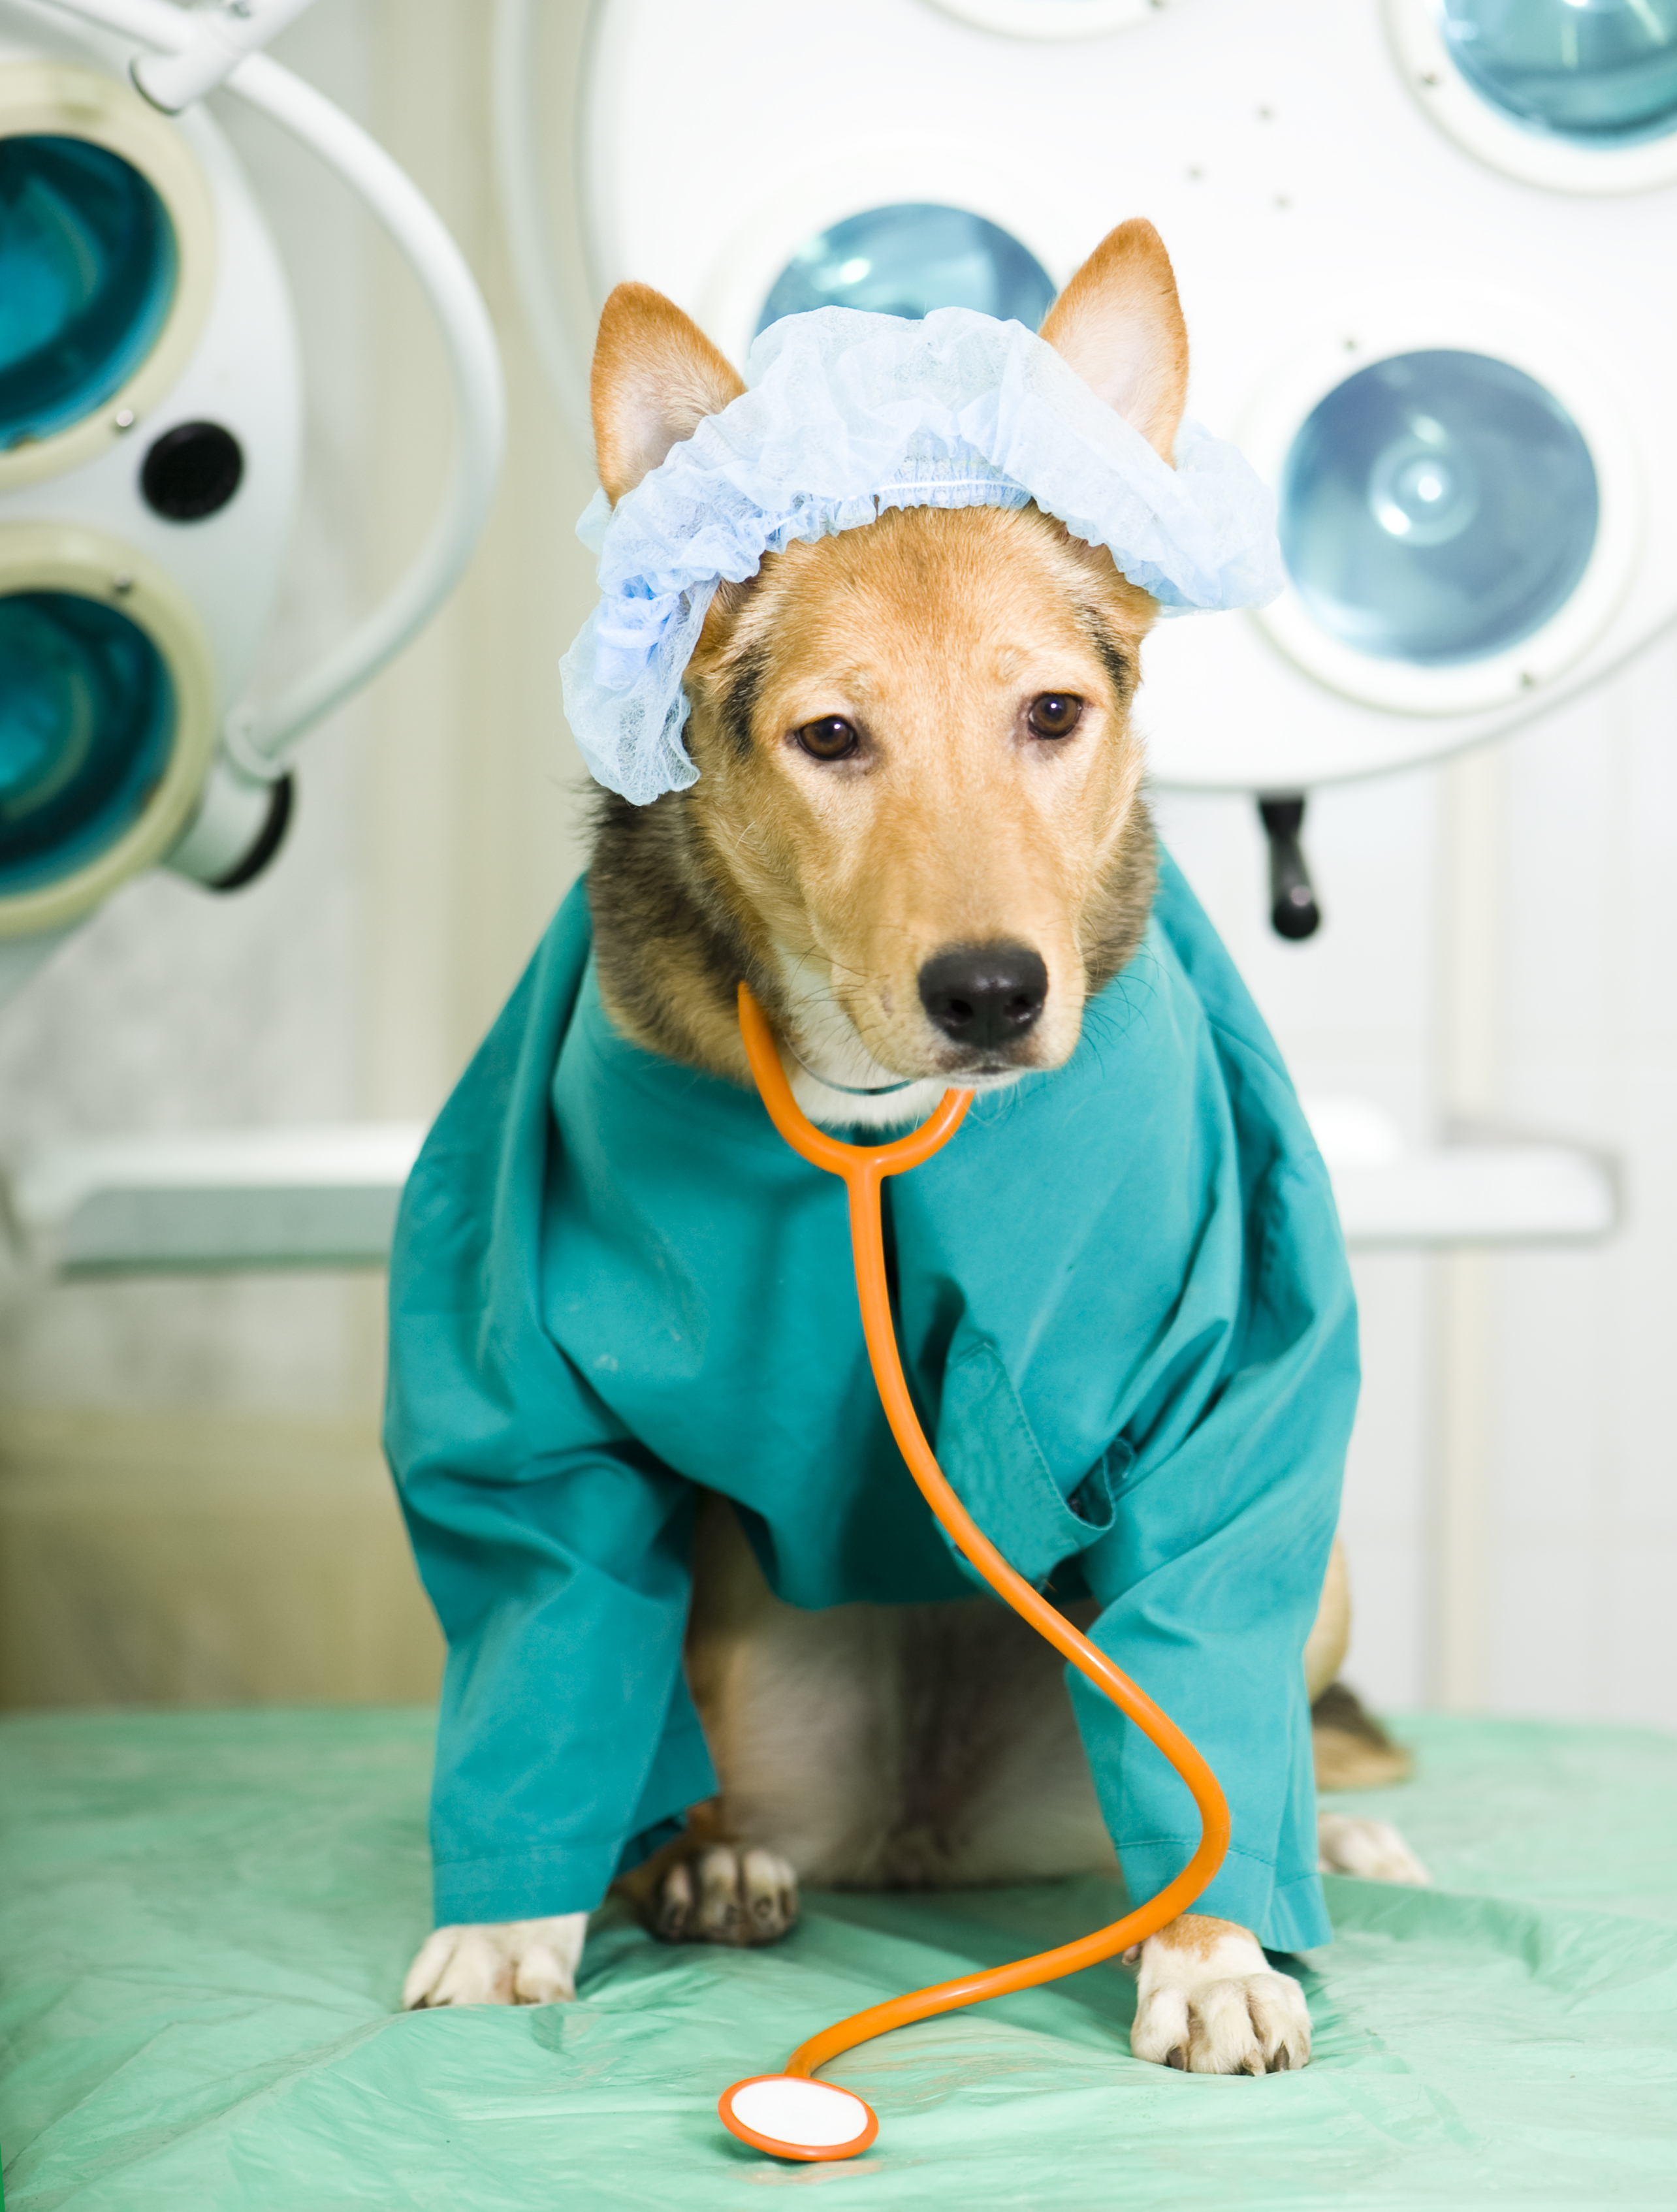 Dog with Scrubs and Stethoscope